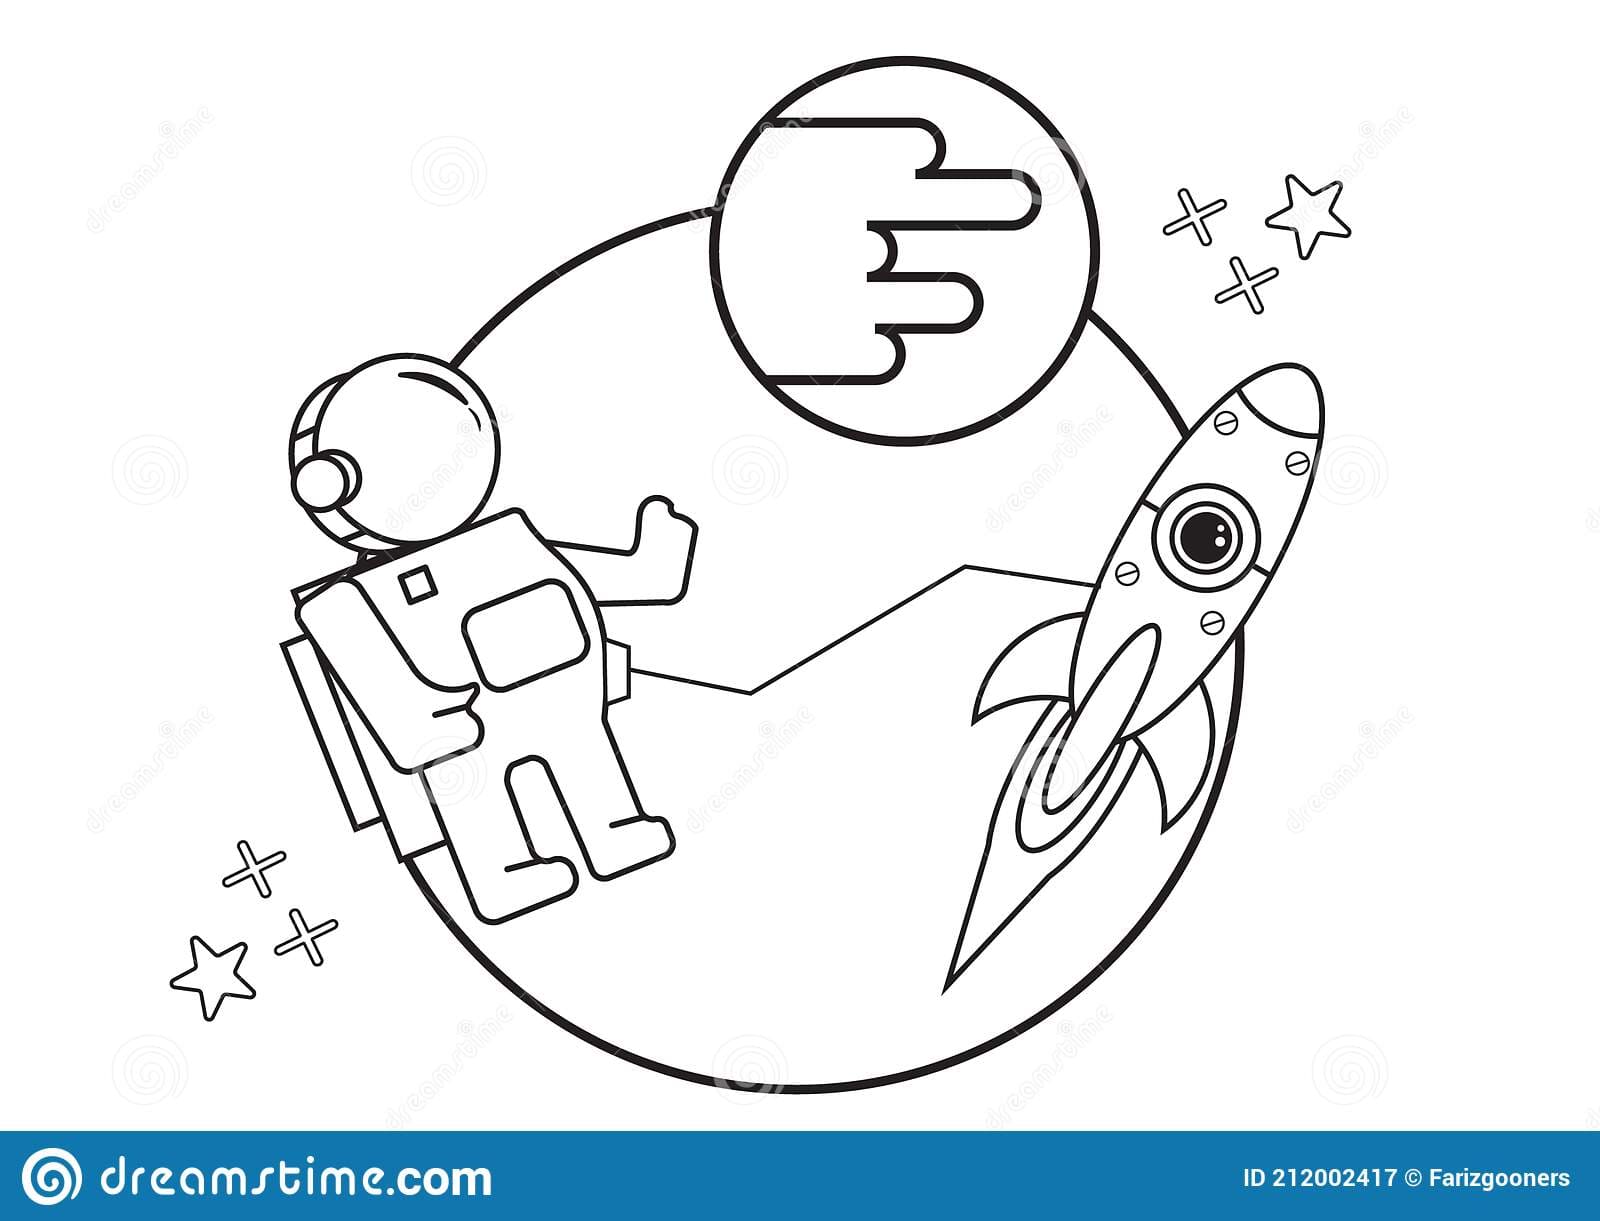 Free Astronaut Printable Coloring Page